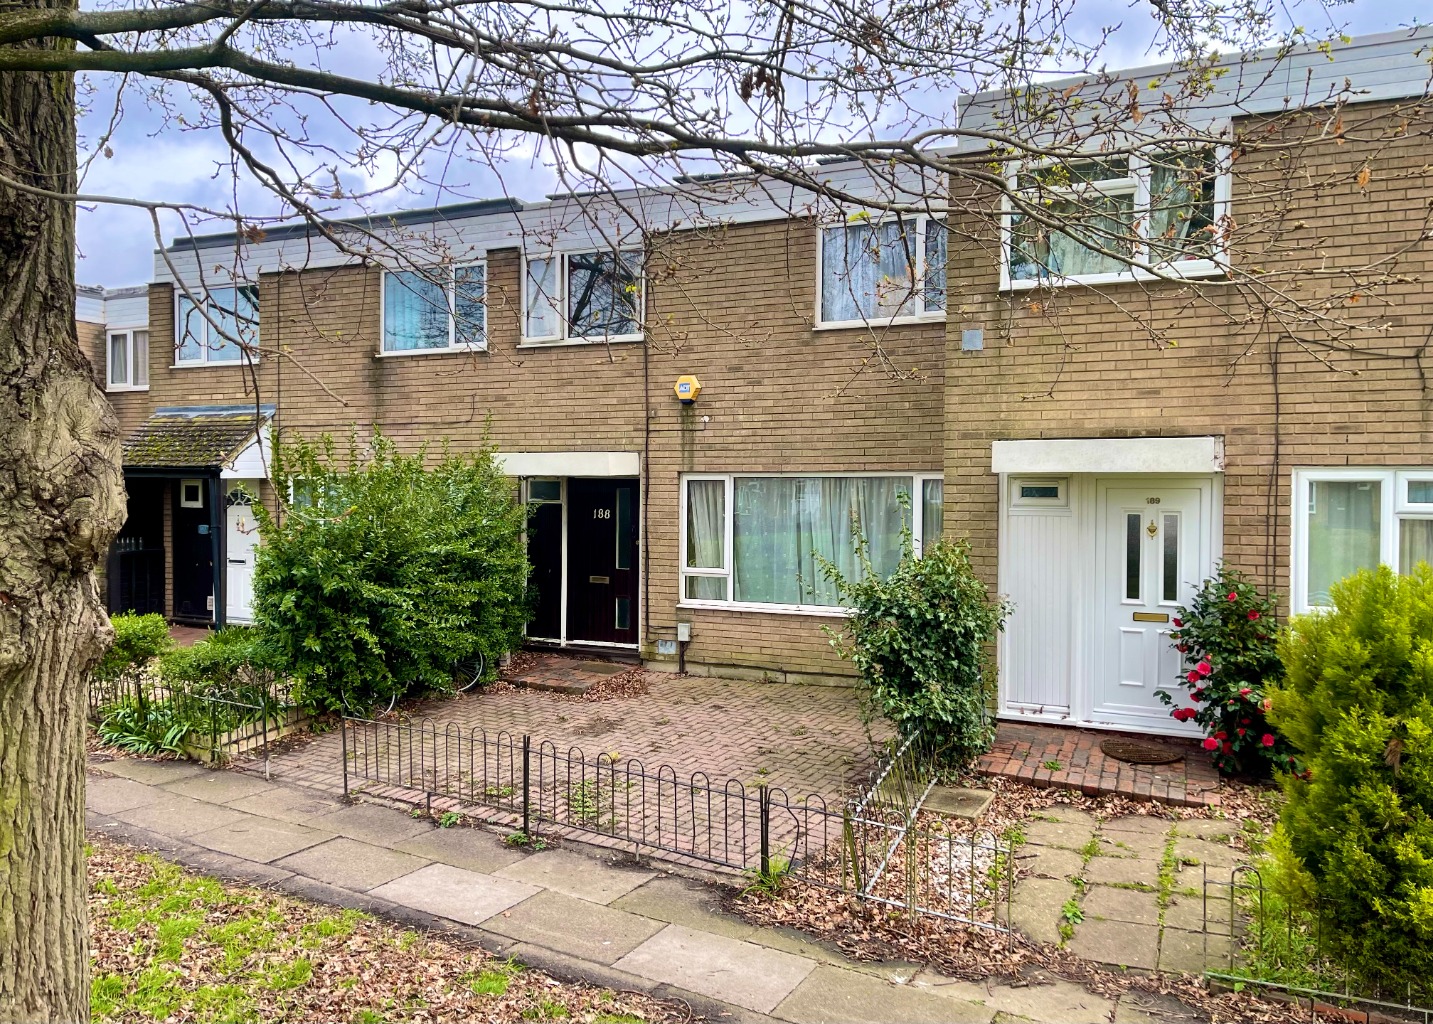 3 bed terraced house for sale in Caswell Close, Farnborough, GU14